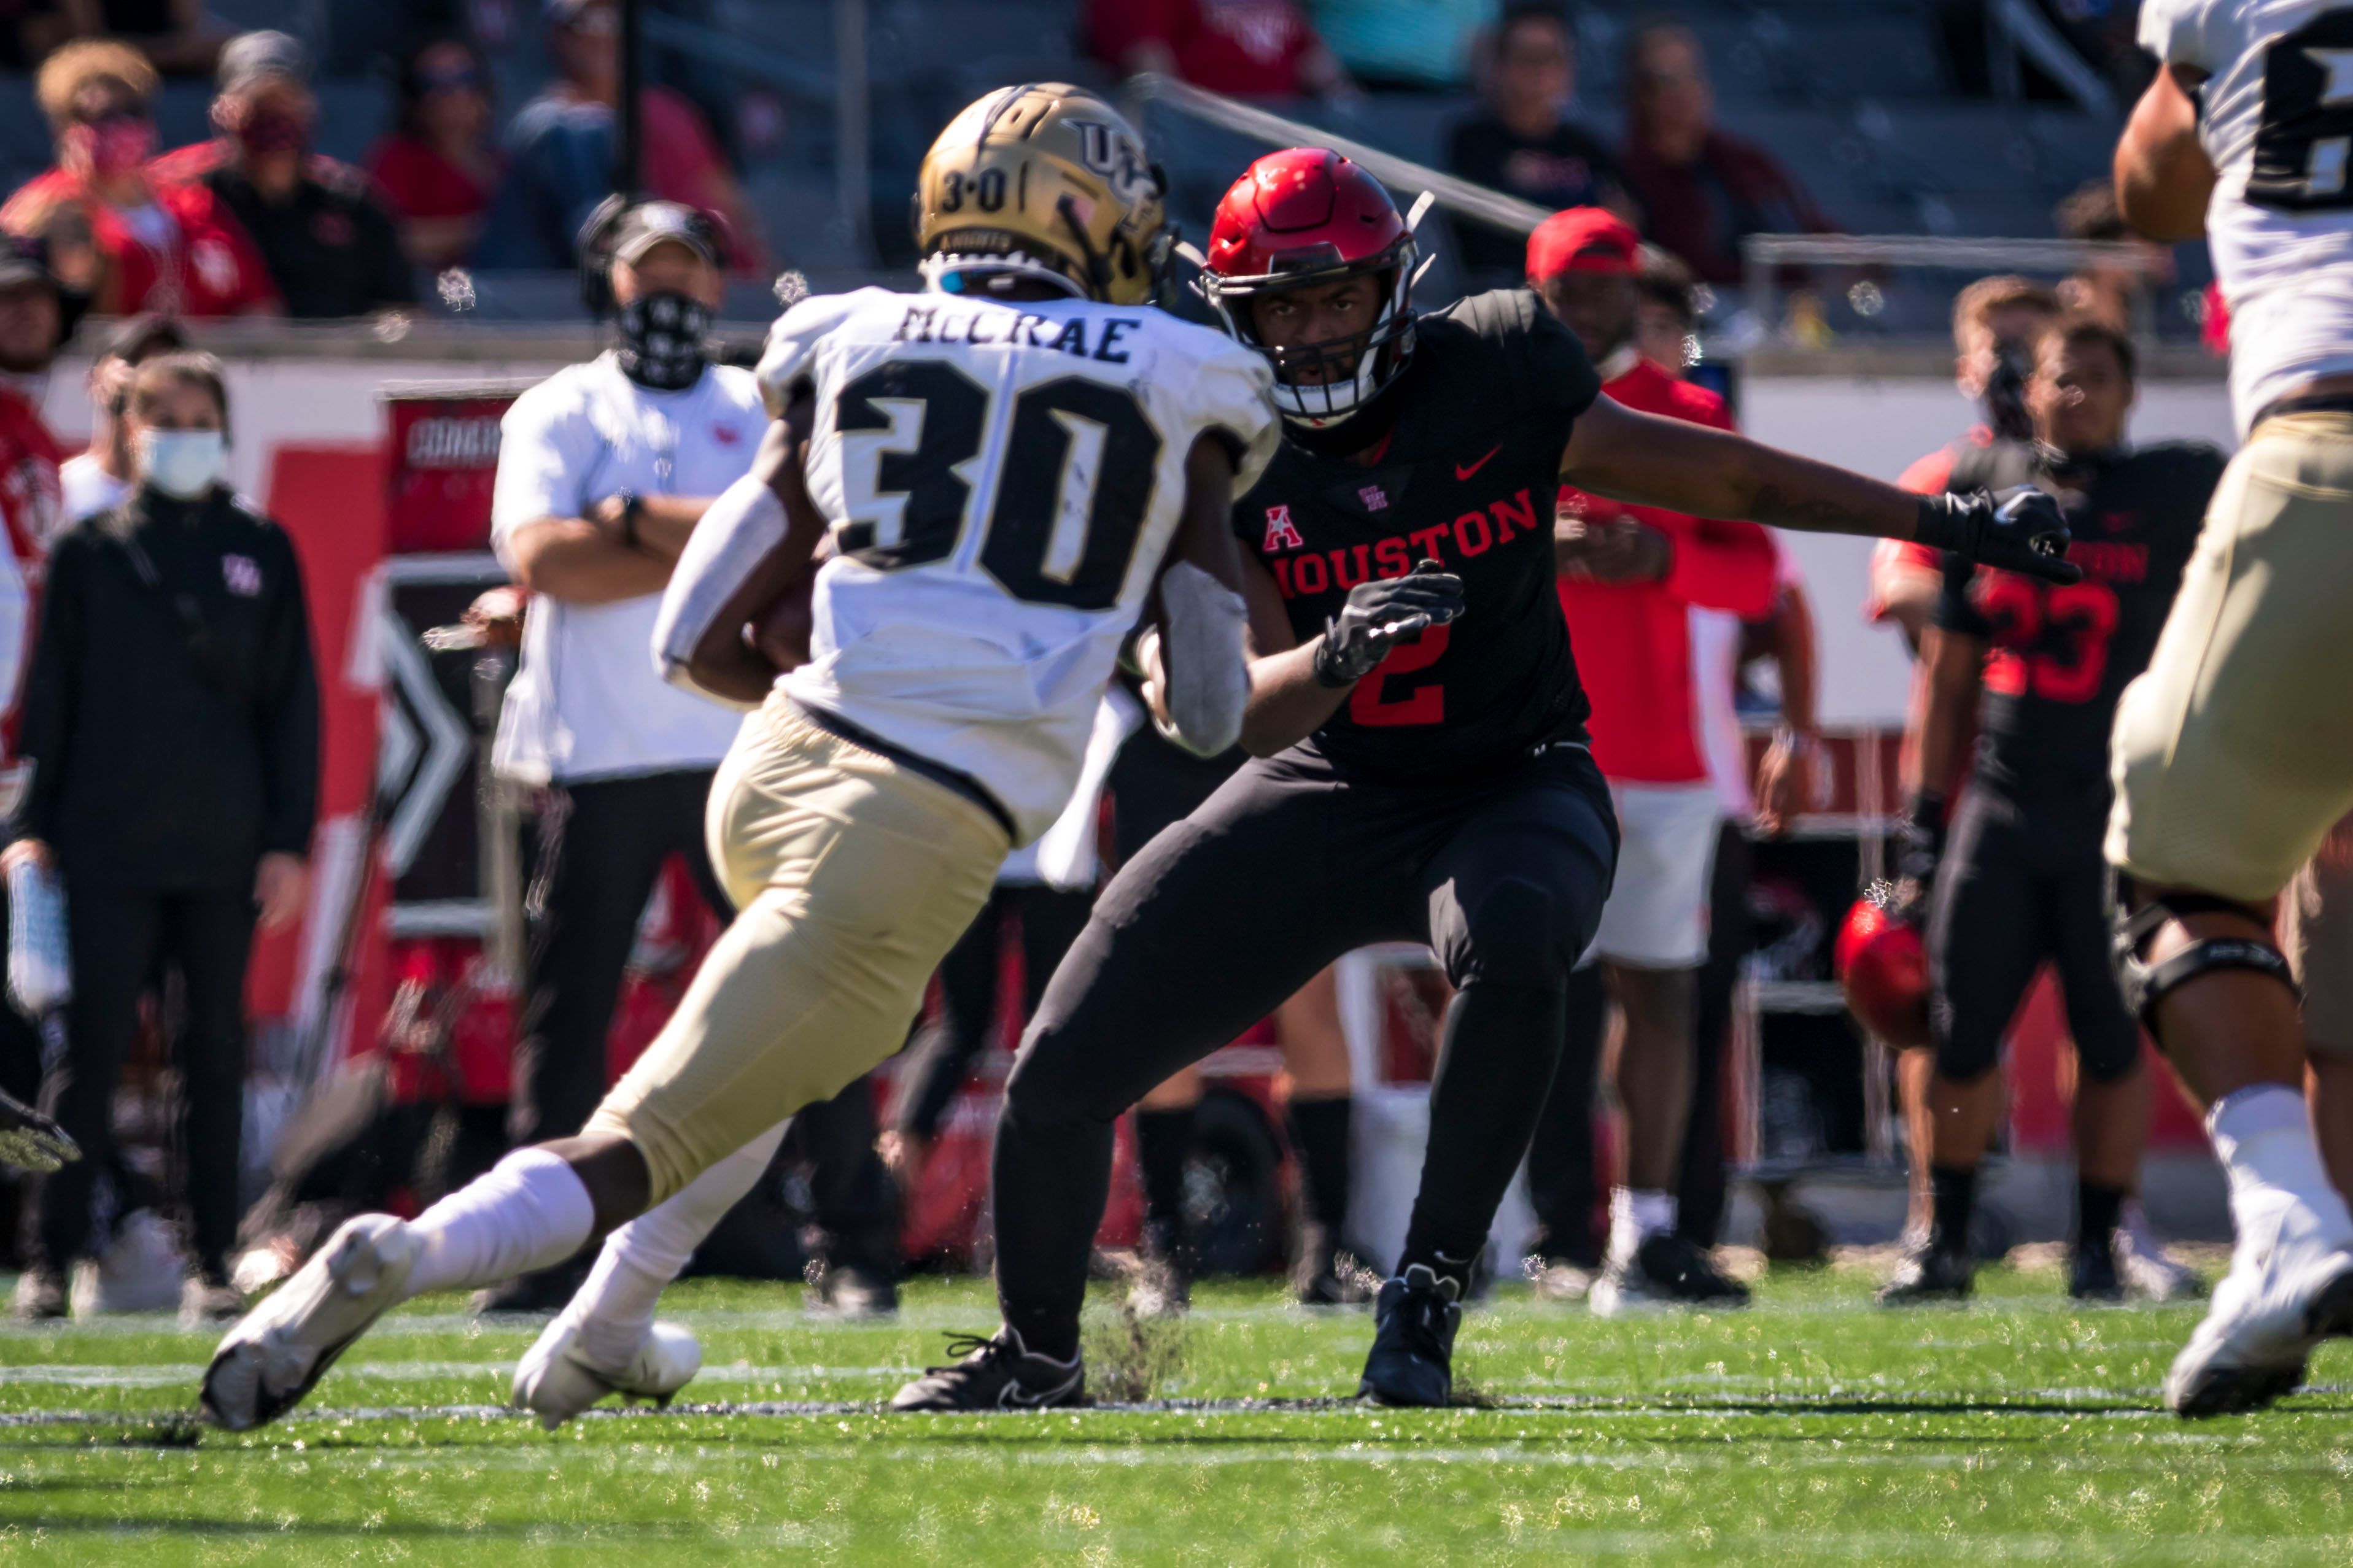 Houston safety Deontay Anderson focuses on UCF running back Greg McCrae in a regular season game during the 2020 season at TDECU Stadium. | Courtesy of UH athletics